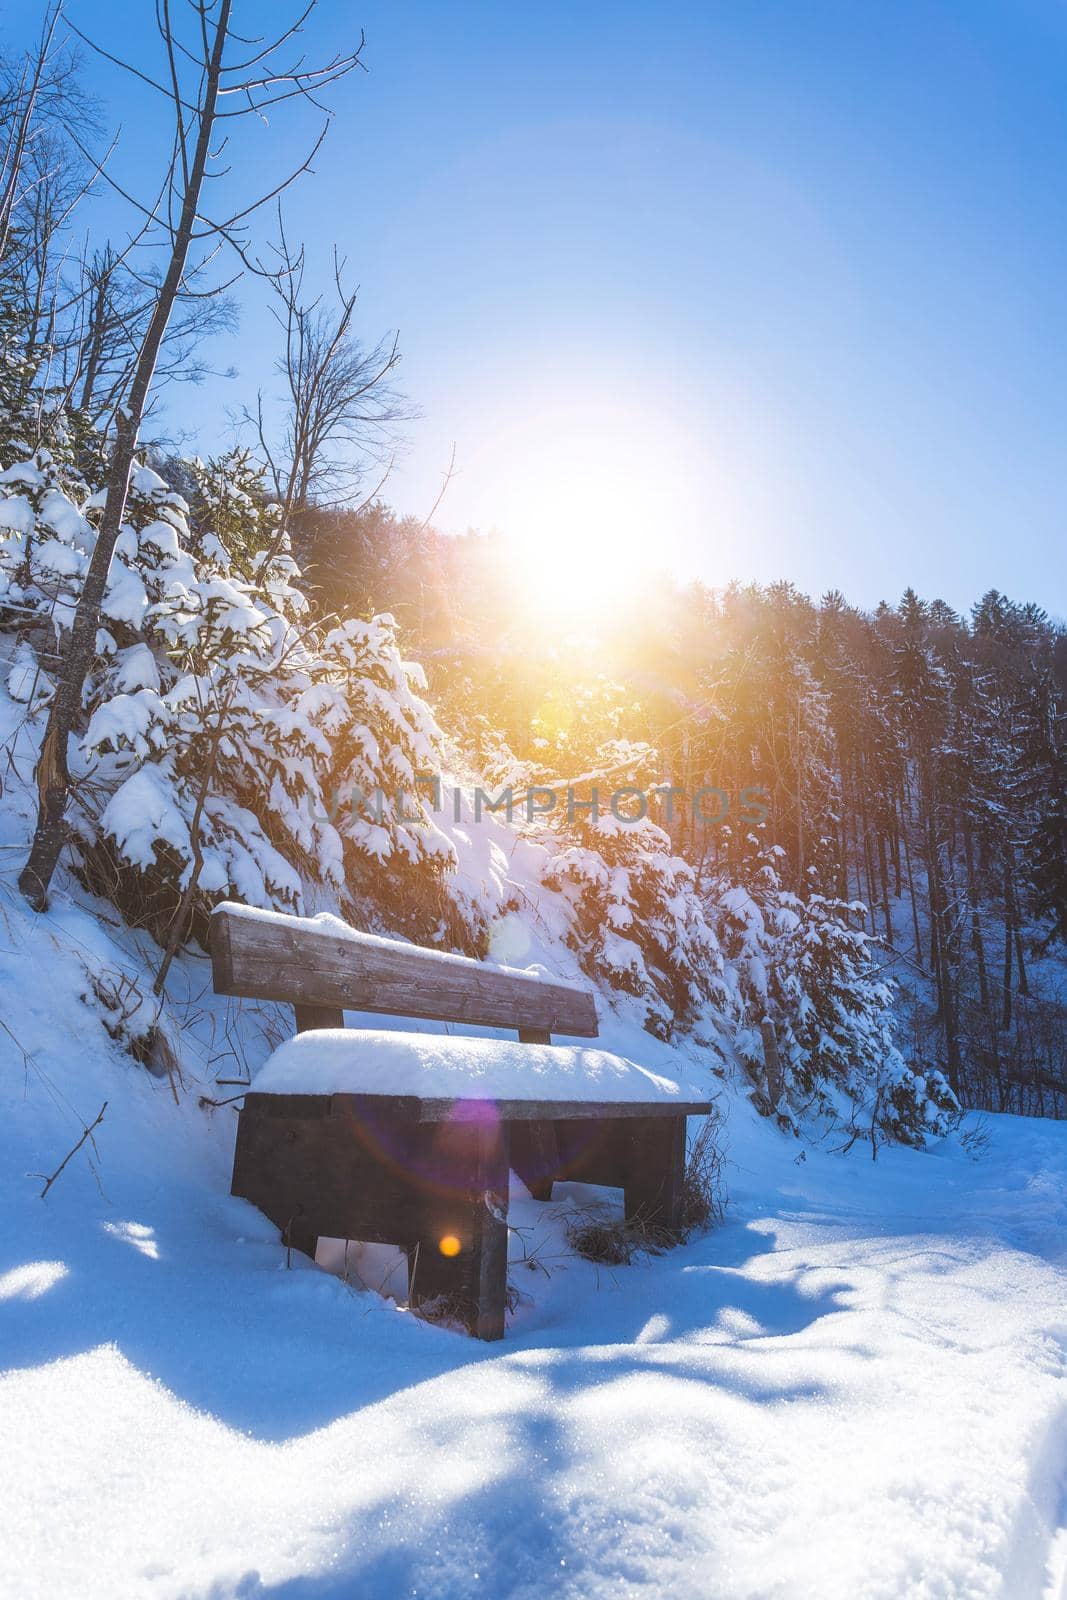 Snow covered bench on Gaisberg, Salzburg. Morning sun and forest. by Daxenbichler